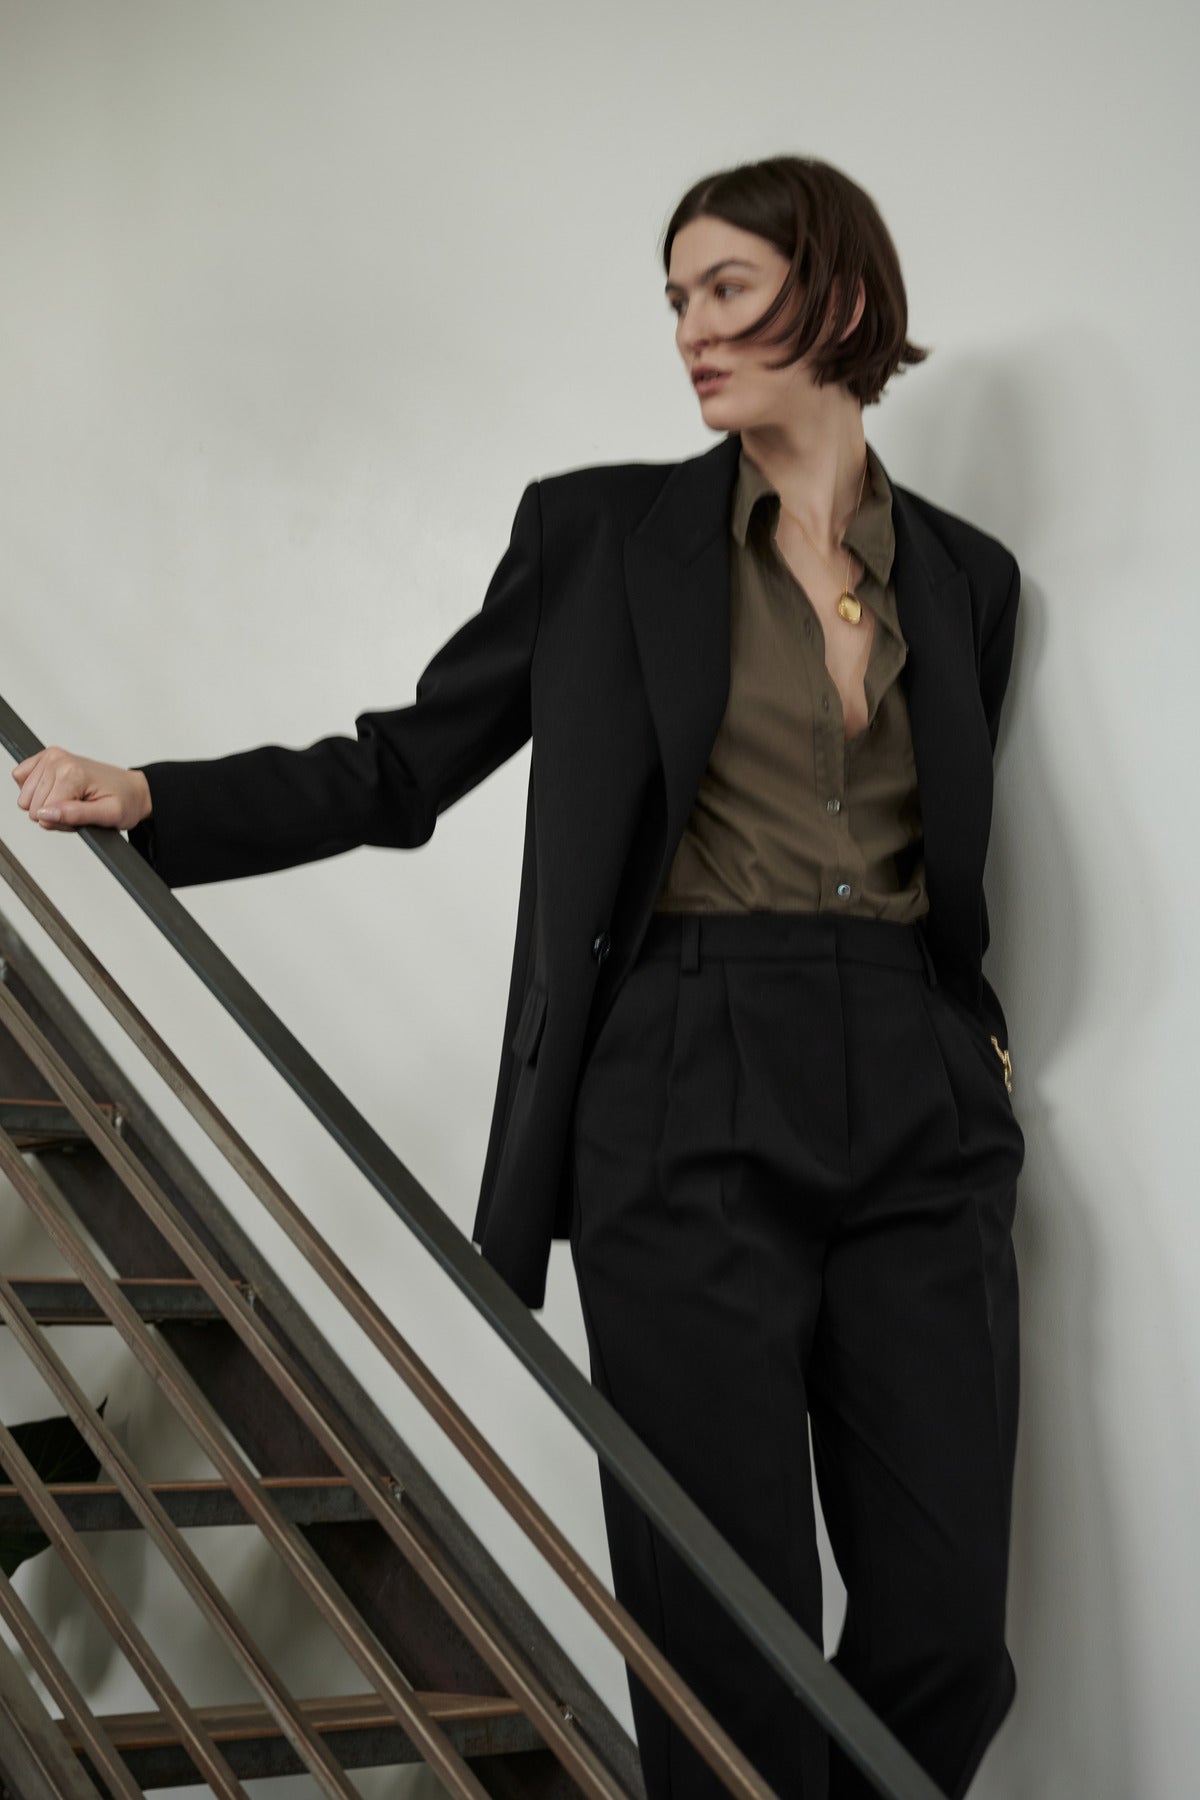 A person in a stylish Velvet by Jenny Graham FAIRFAX BLAZER with structured shoulders and olive shirt posing beside a staircase railing.-35995793948865